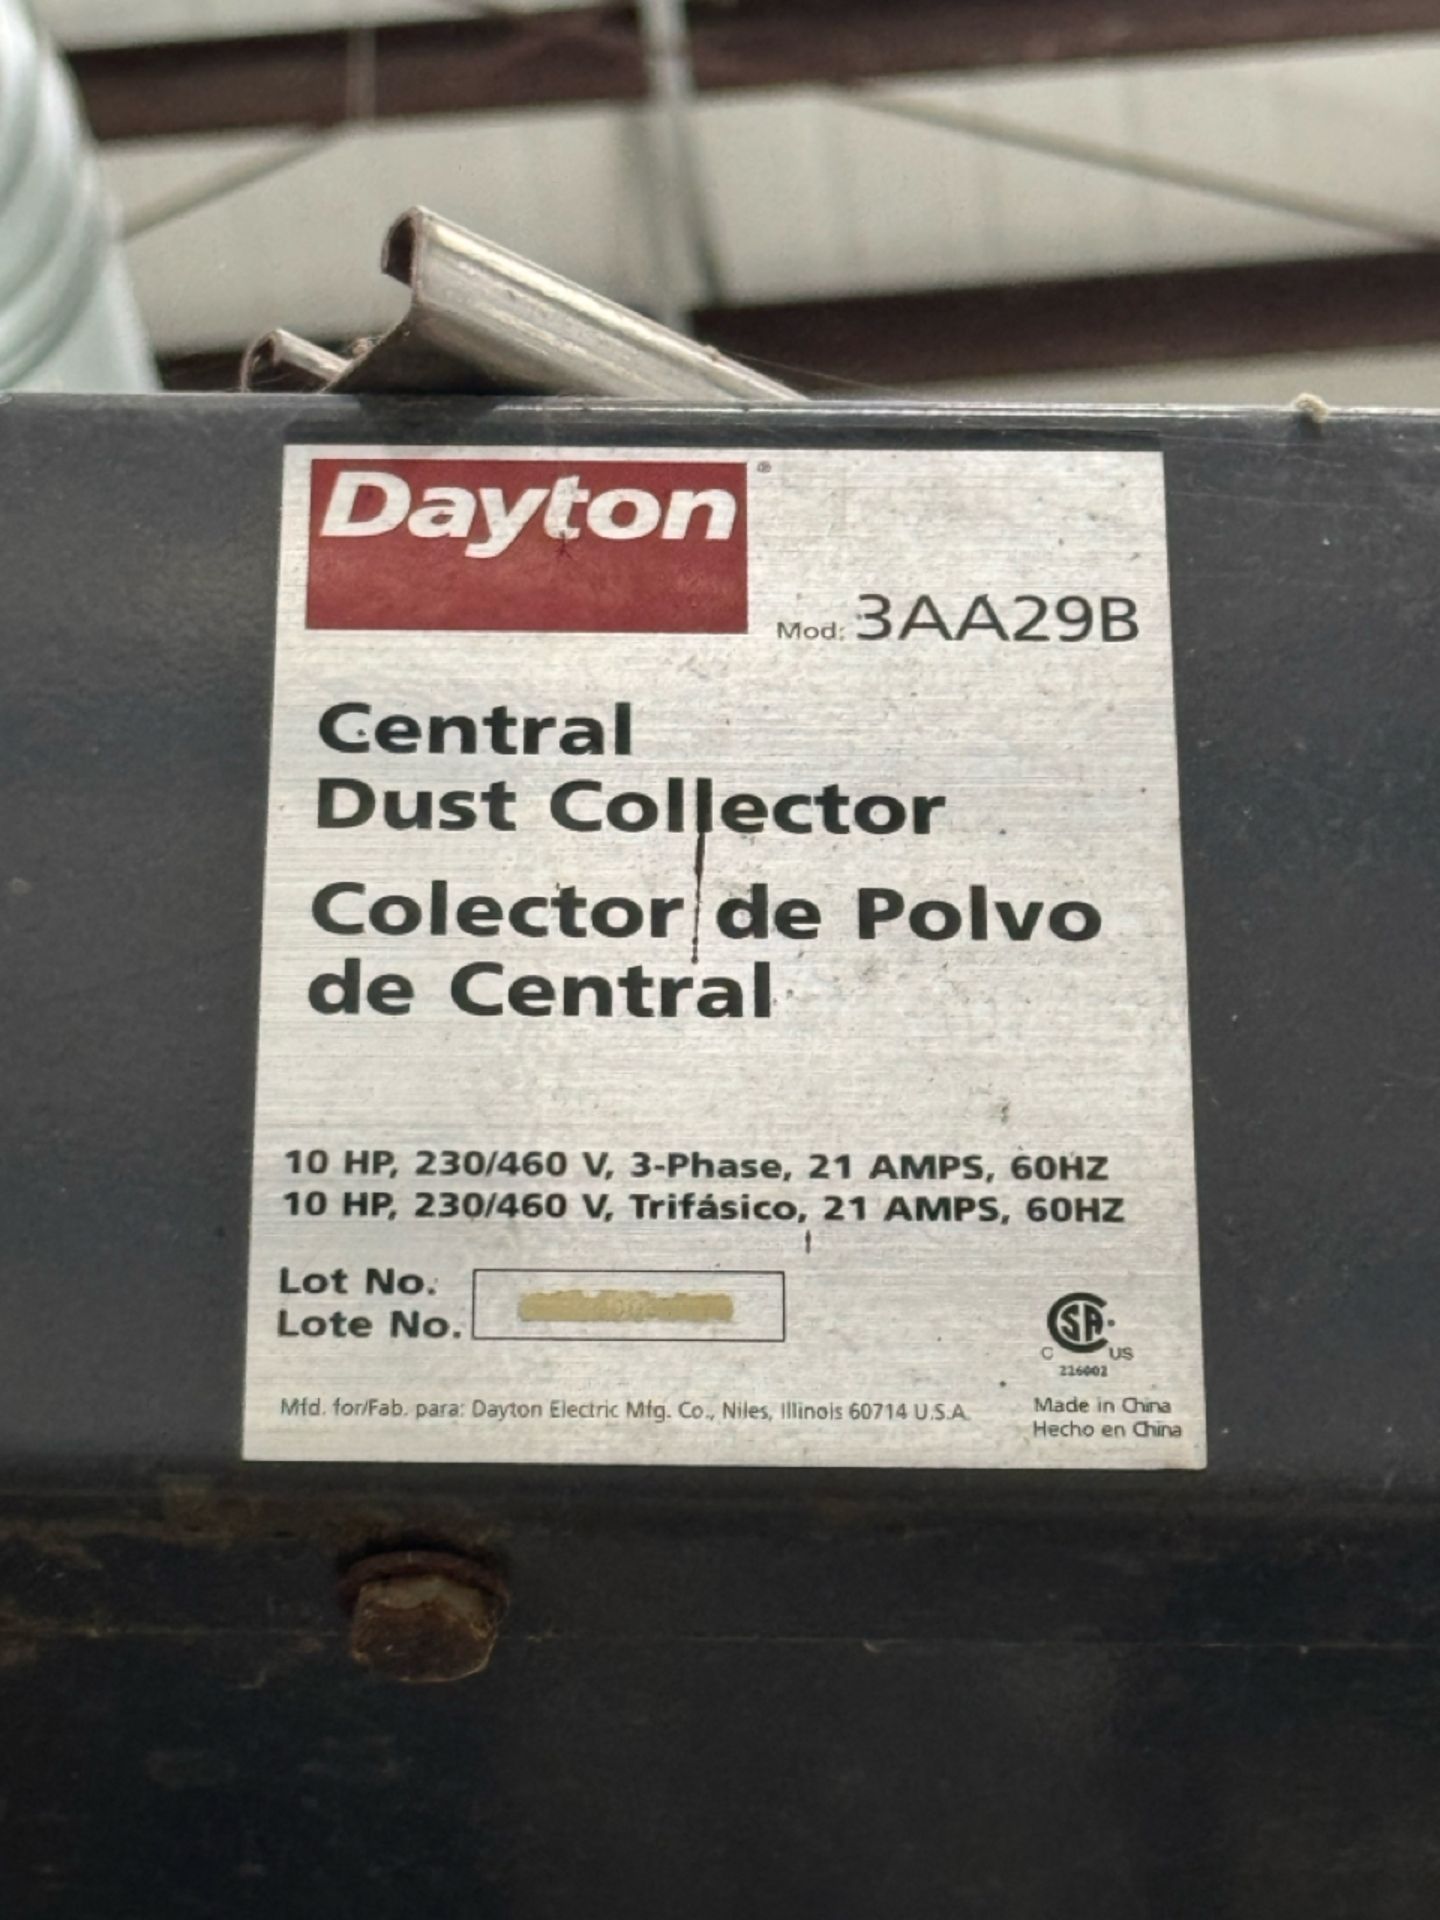 Dayton Central Dust Collector - Image 2 of 4